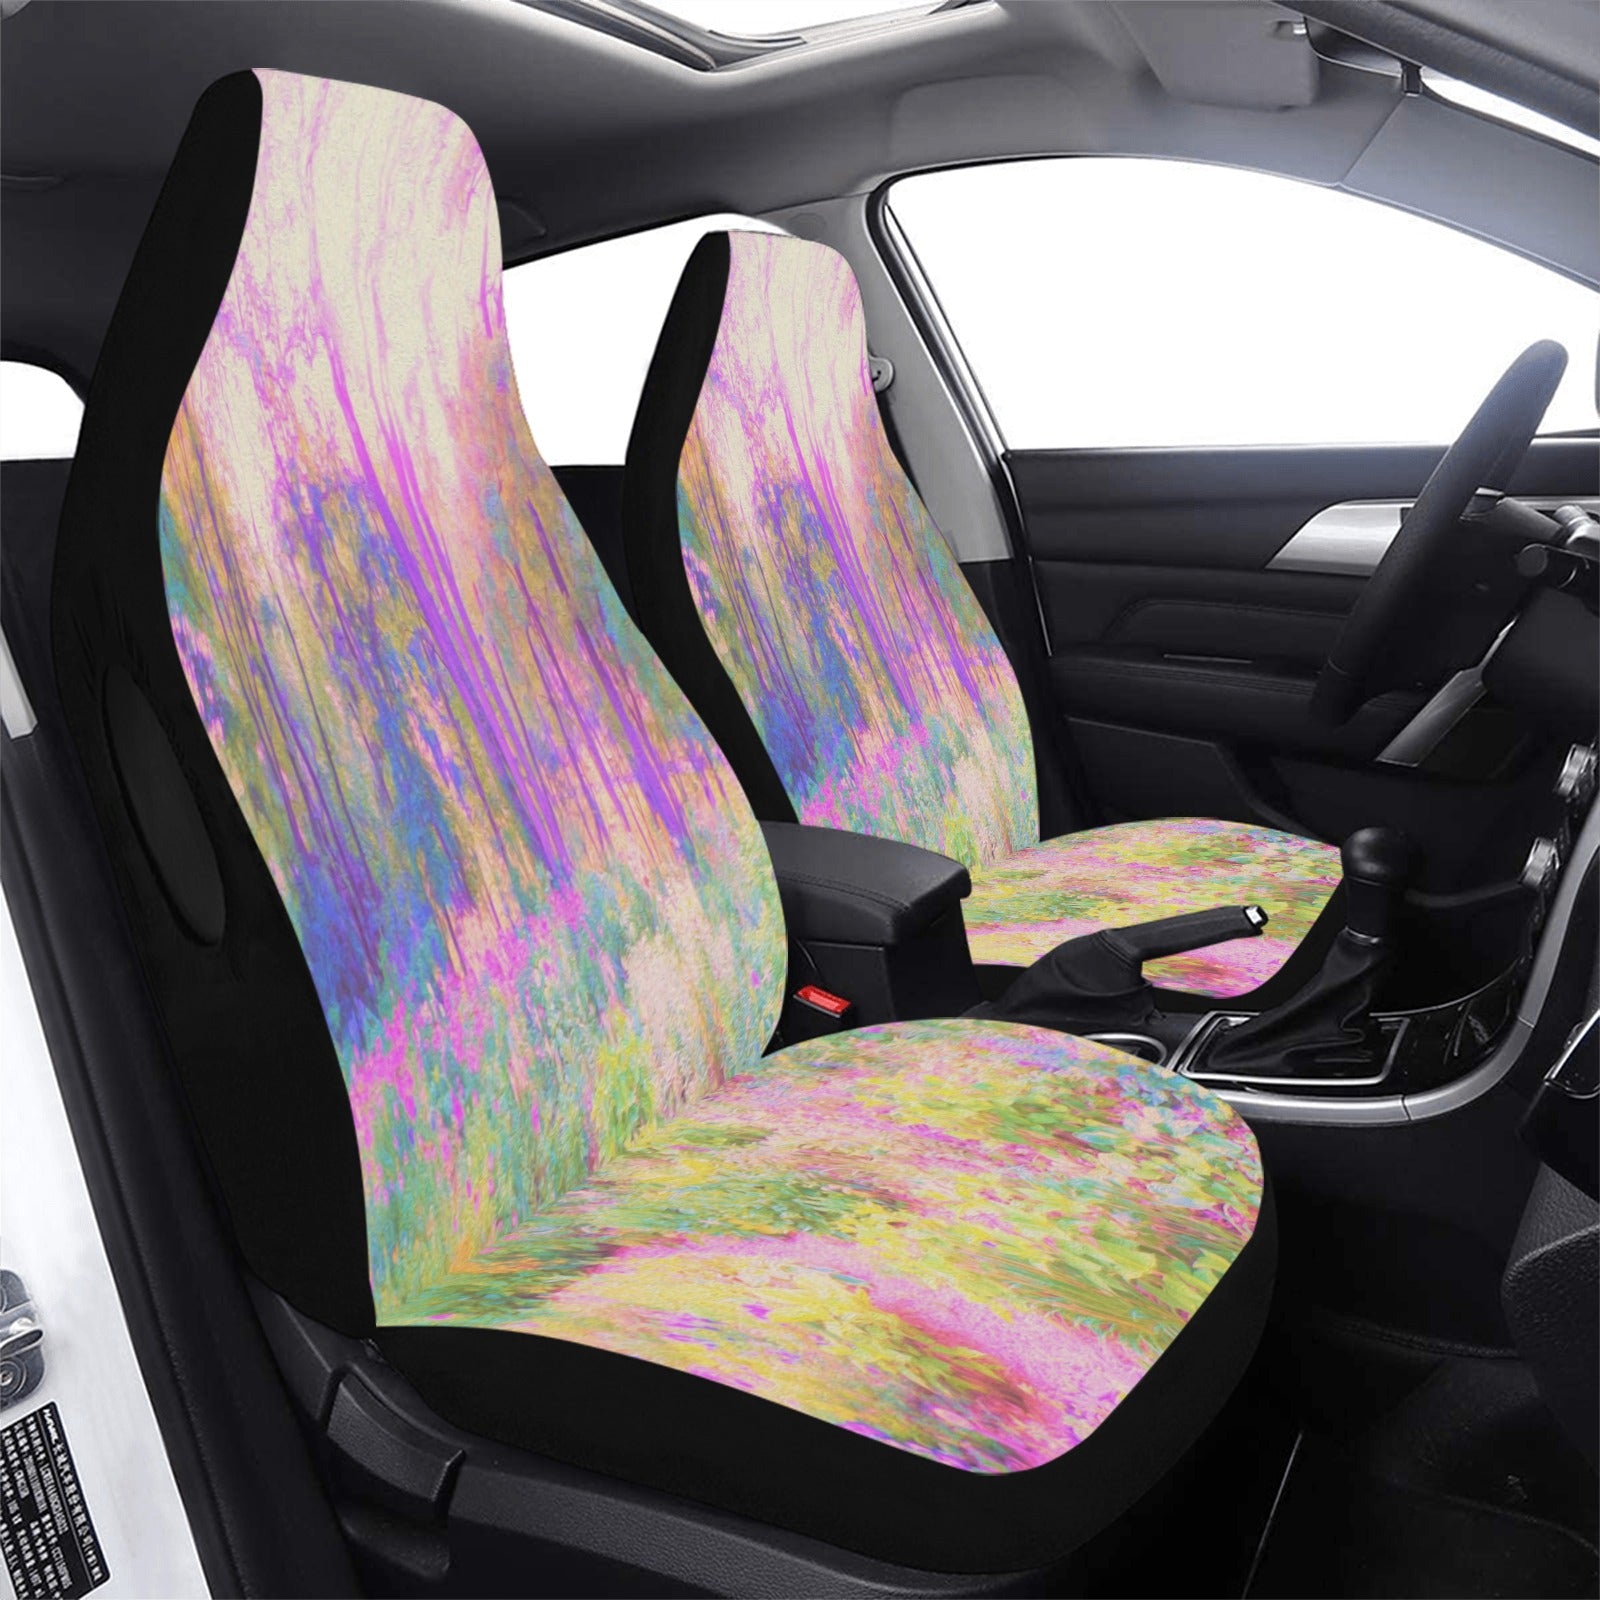 Car Seat Covers, Illuminated Pink and Coral Impressionistic Landscape